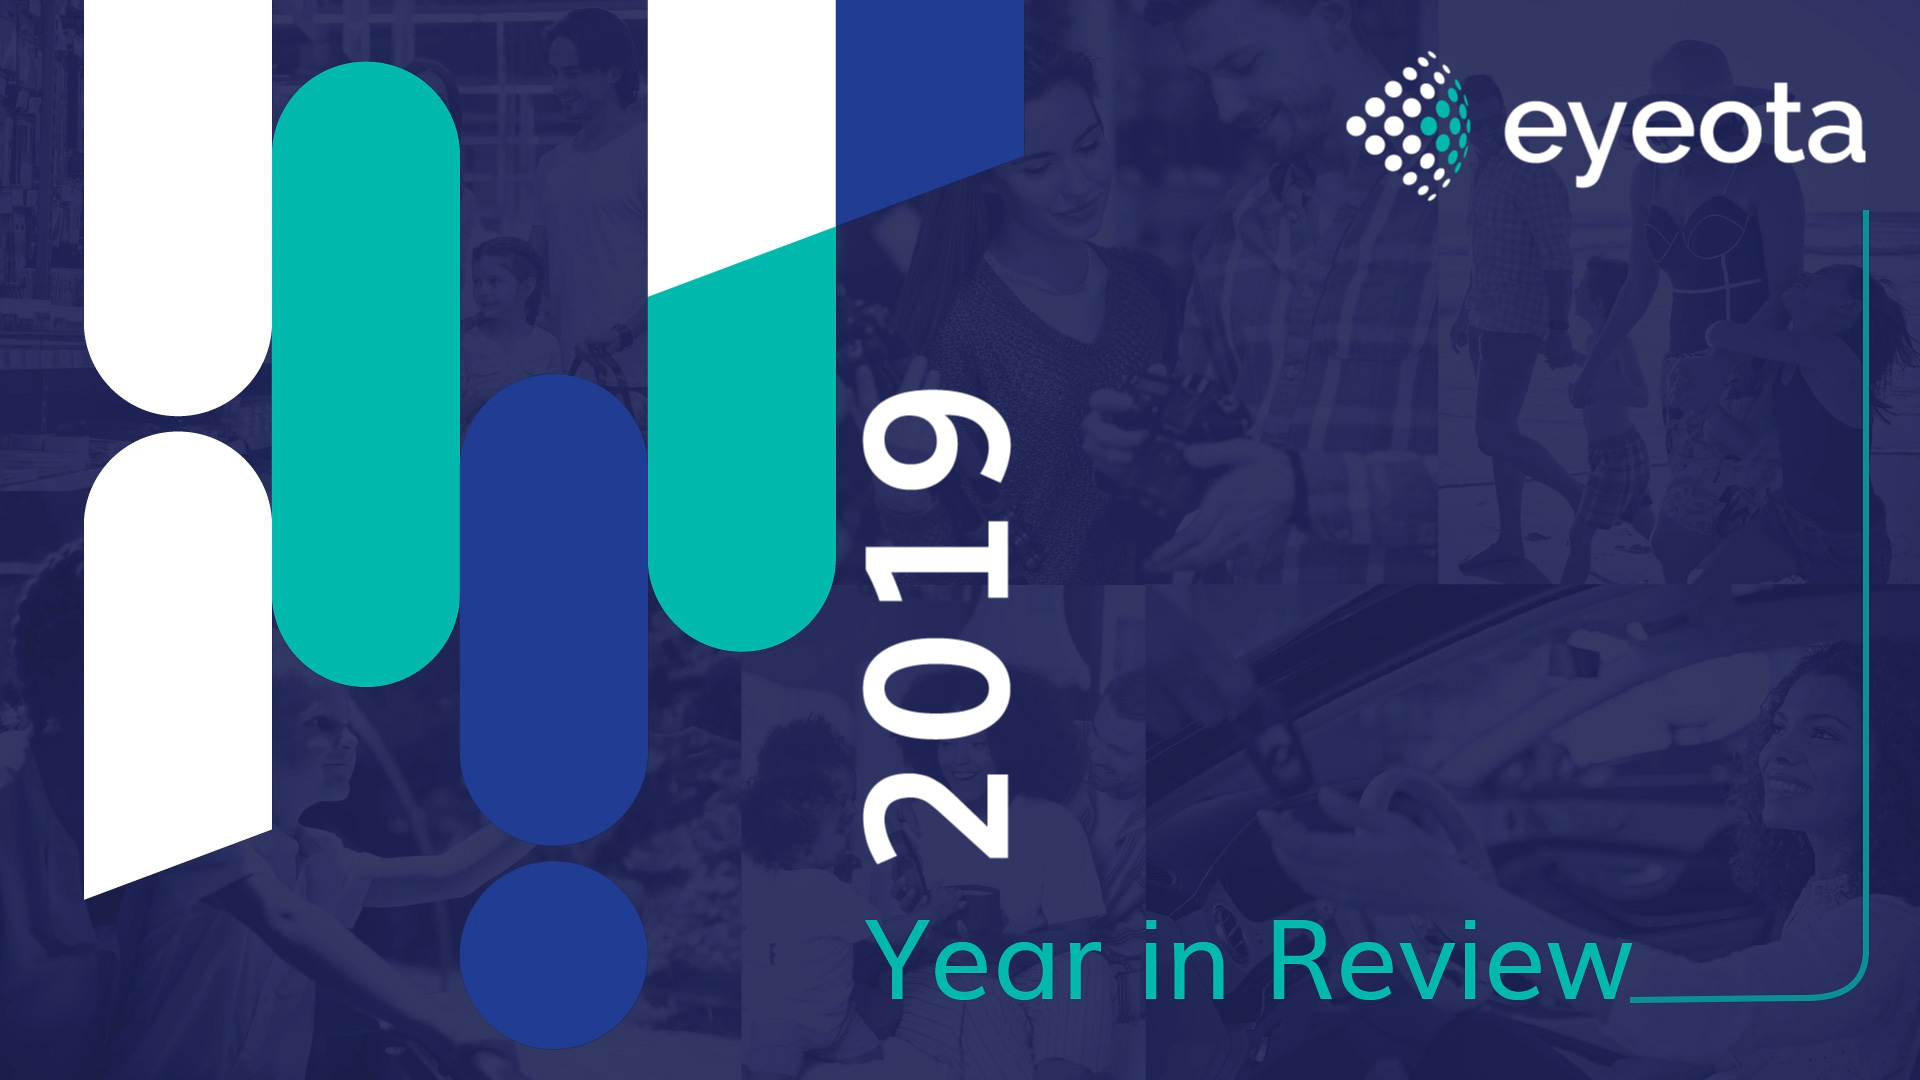 a collage of background images with dark blue, medium blue, and green abstract shapes with the Eyeota logo and text that says "2019 Year in Review"